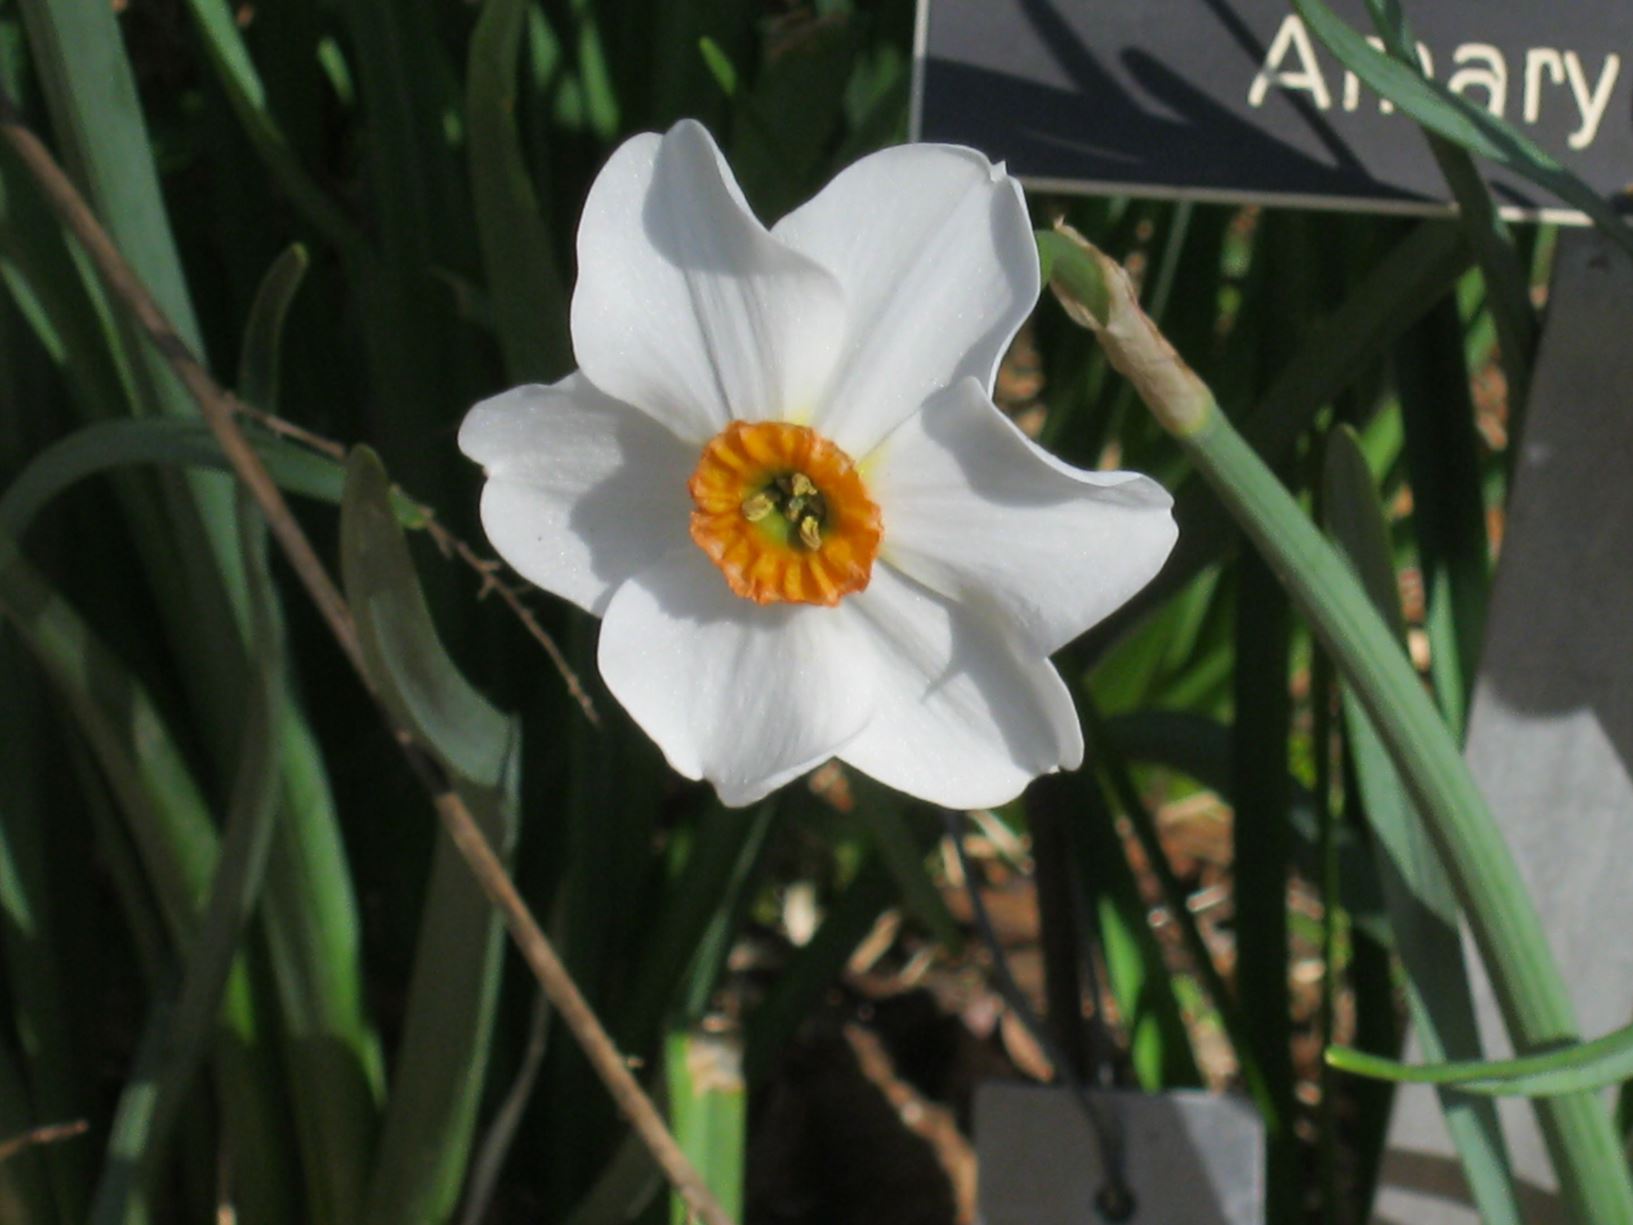 Narcissus 'Vienna Woods' - poeticus daffodil